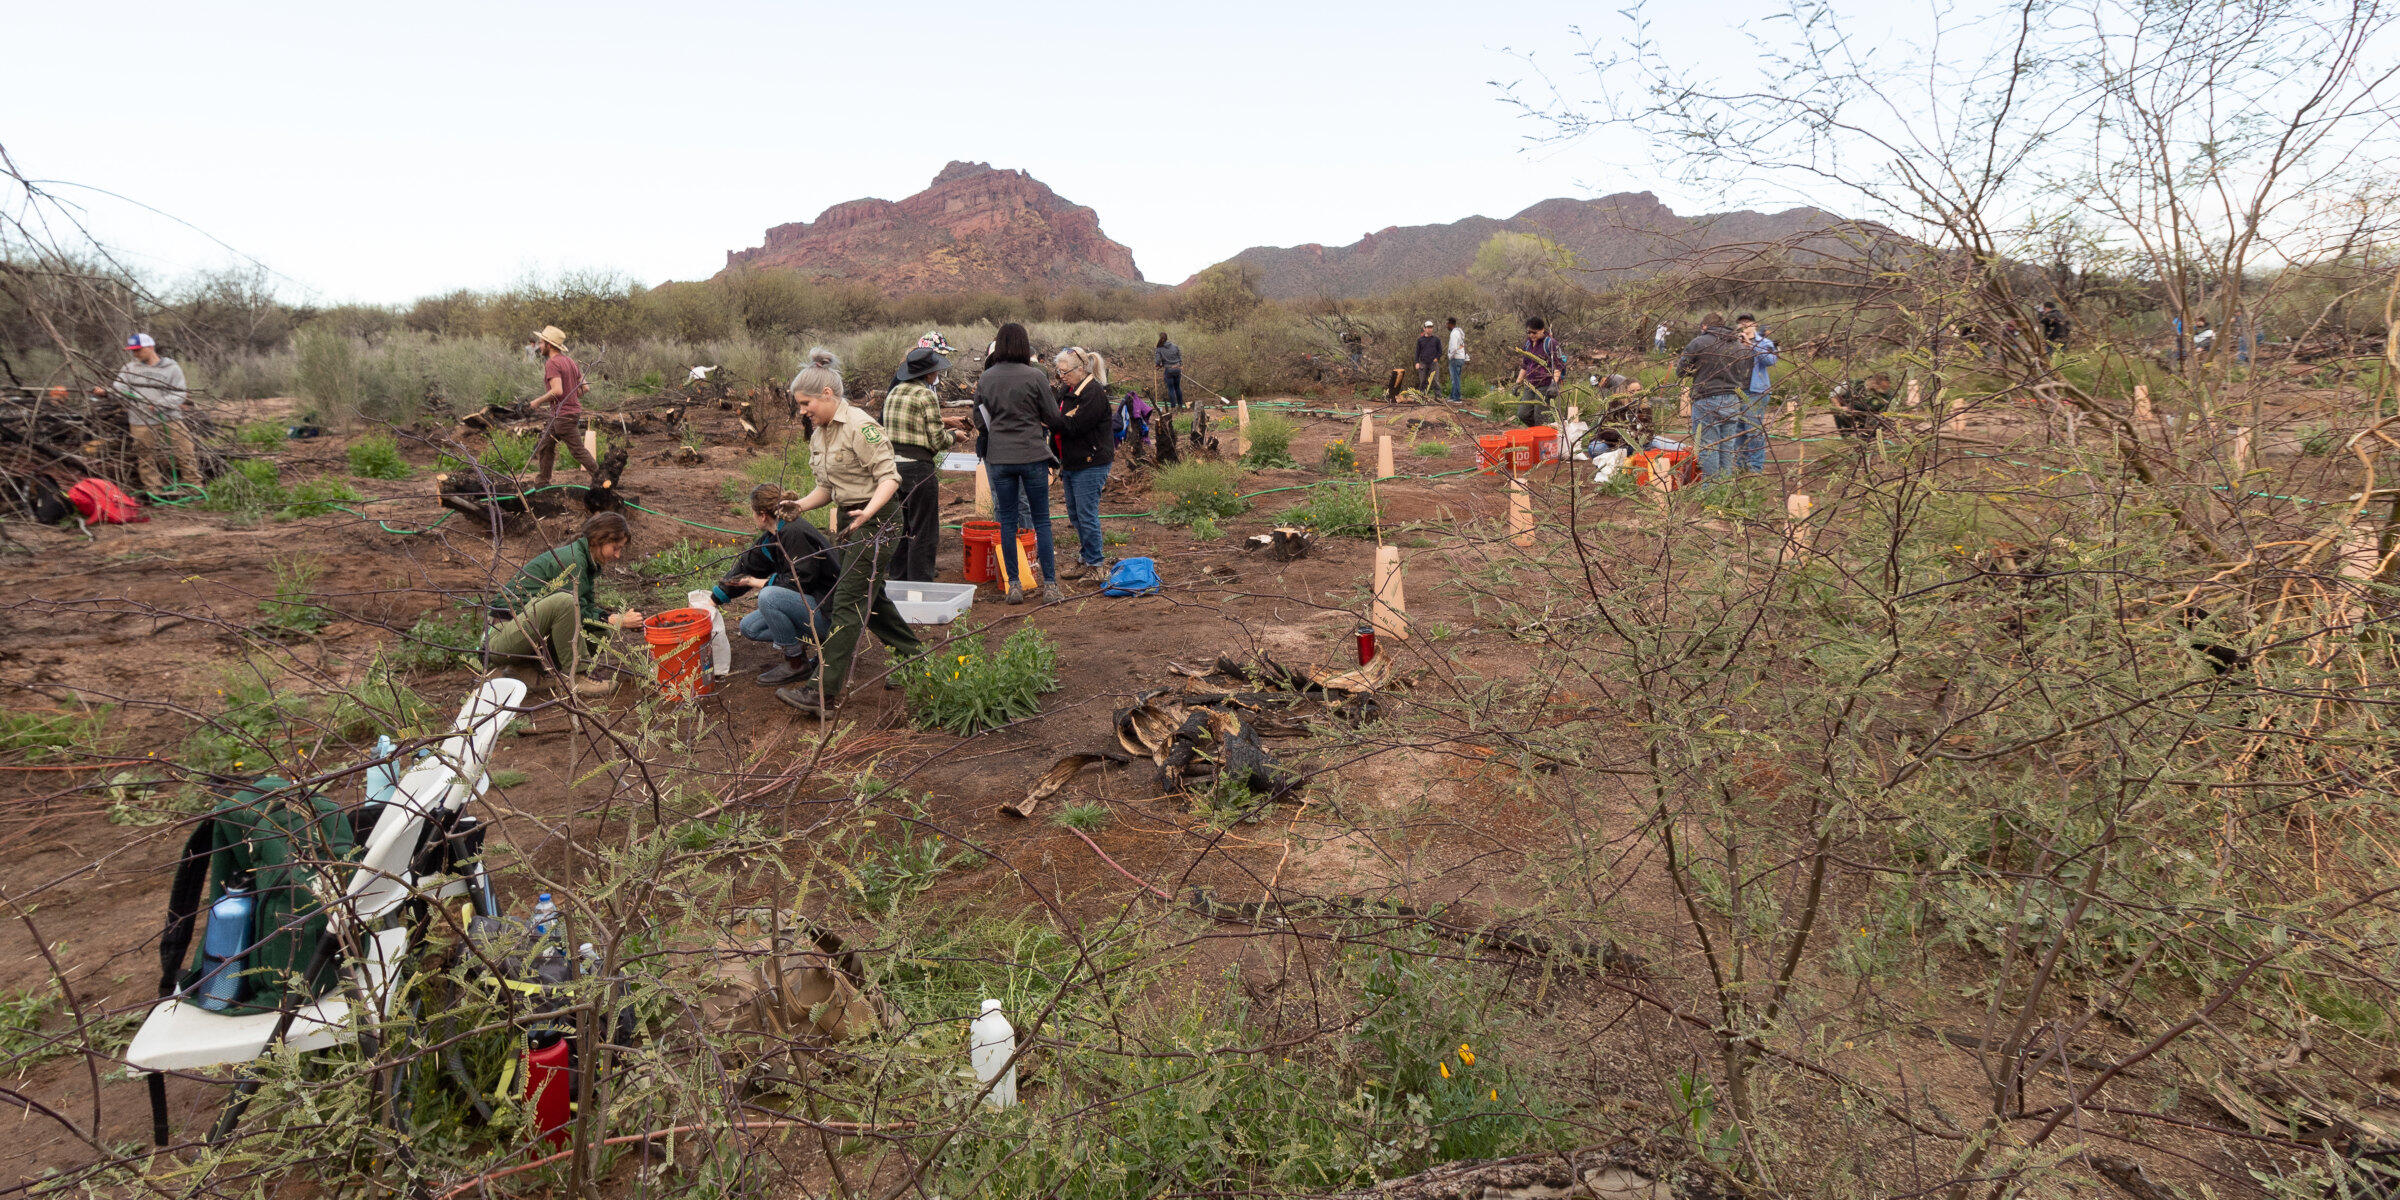 Volunteers conduct plantings along a previously burned stretch of river-adjacent desert.